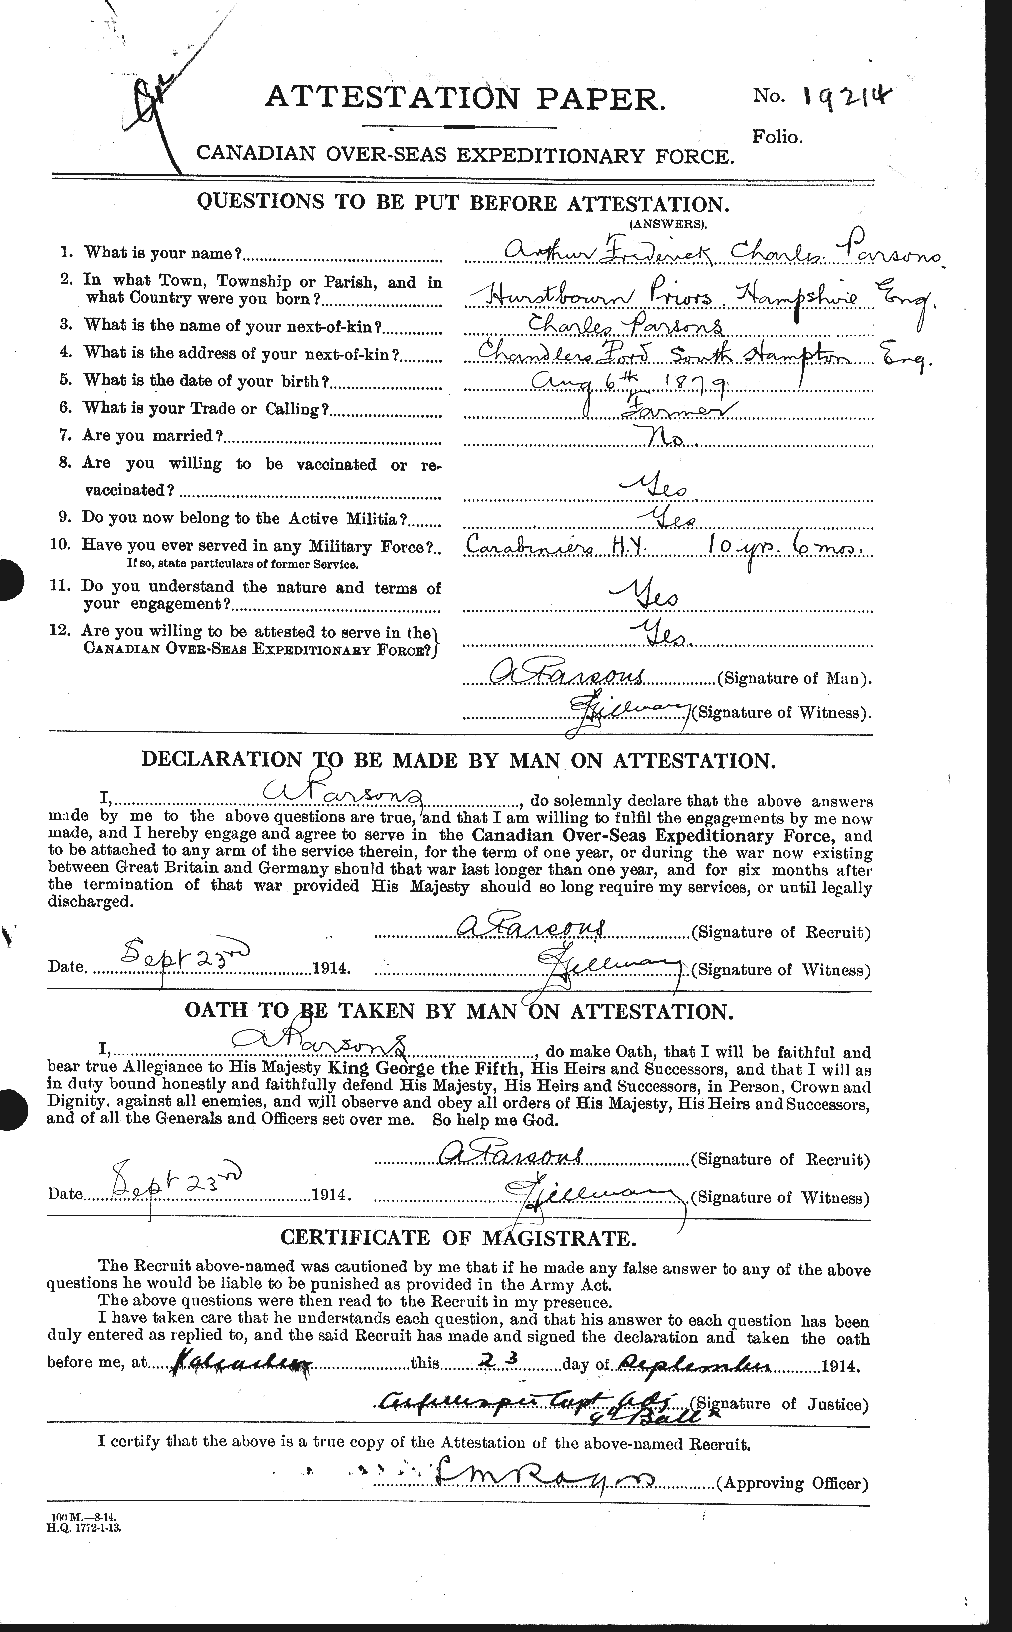 Personnel Records of the First World War - CEF 566773a